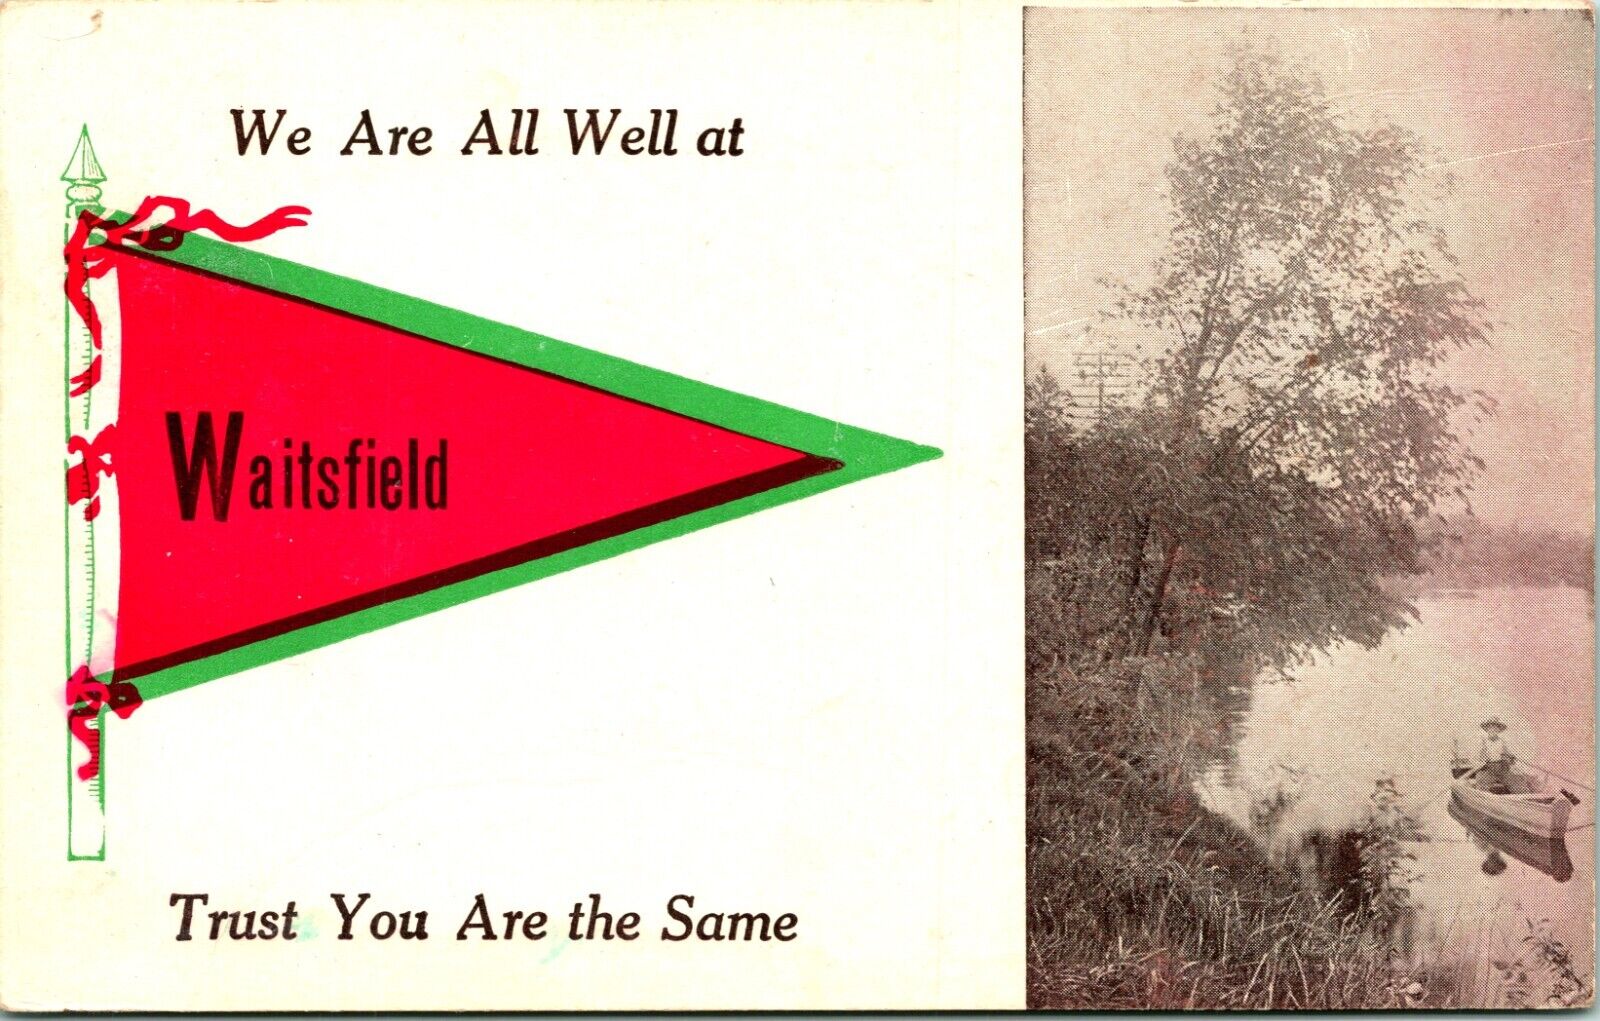 C.1920'S POSTCARD WE ARE ALL WELL AT WAITSFIELD, VERMONT TRUST YOU ARE THE SAME